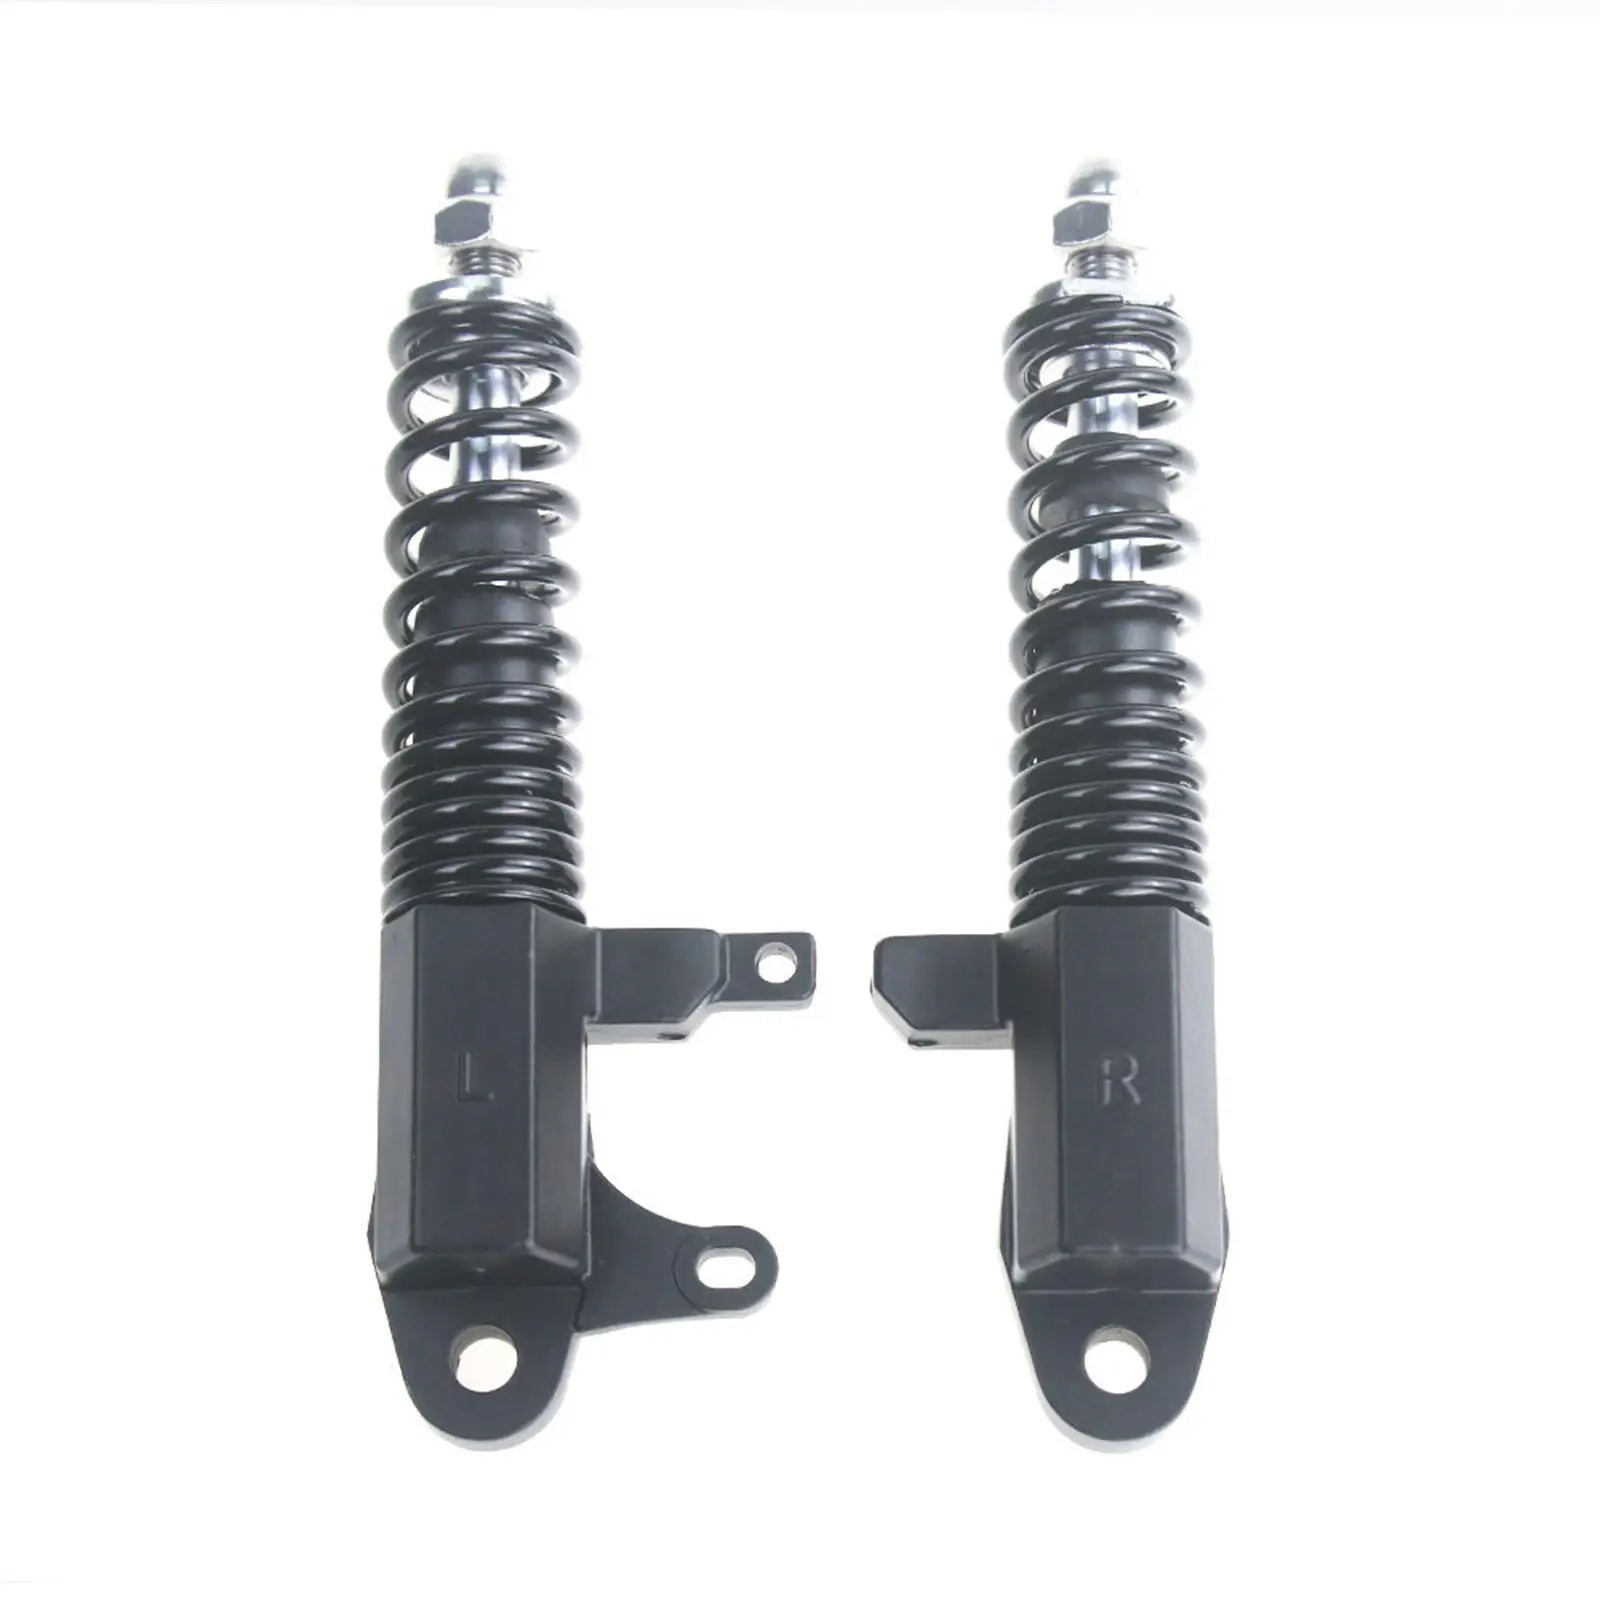 2x Front Fork Hydraulic Shock Absorber Black Adjustable Cycling Equipment